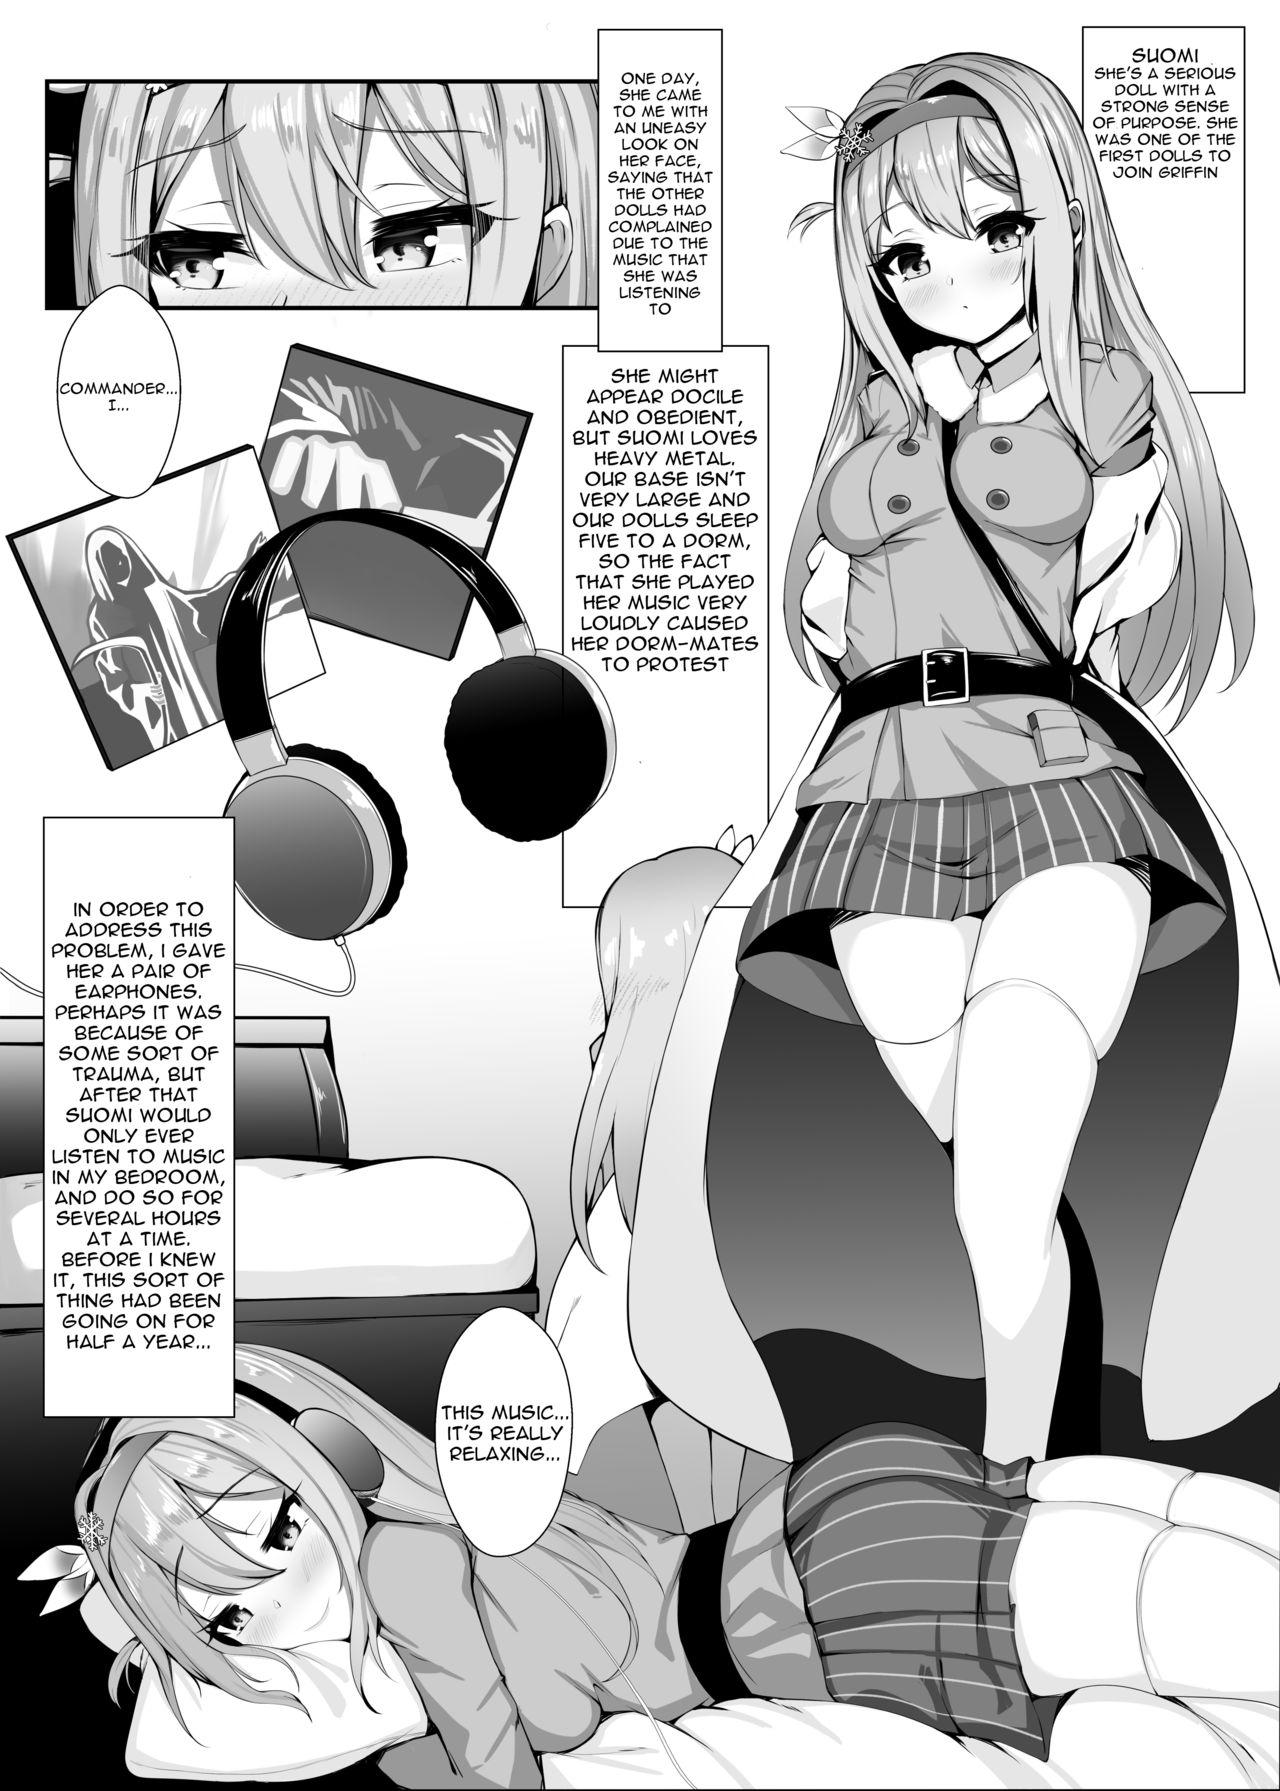 Amigos Suomi - Mission of Love - Girls frontline Cruising - Page 4